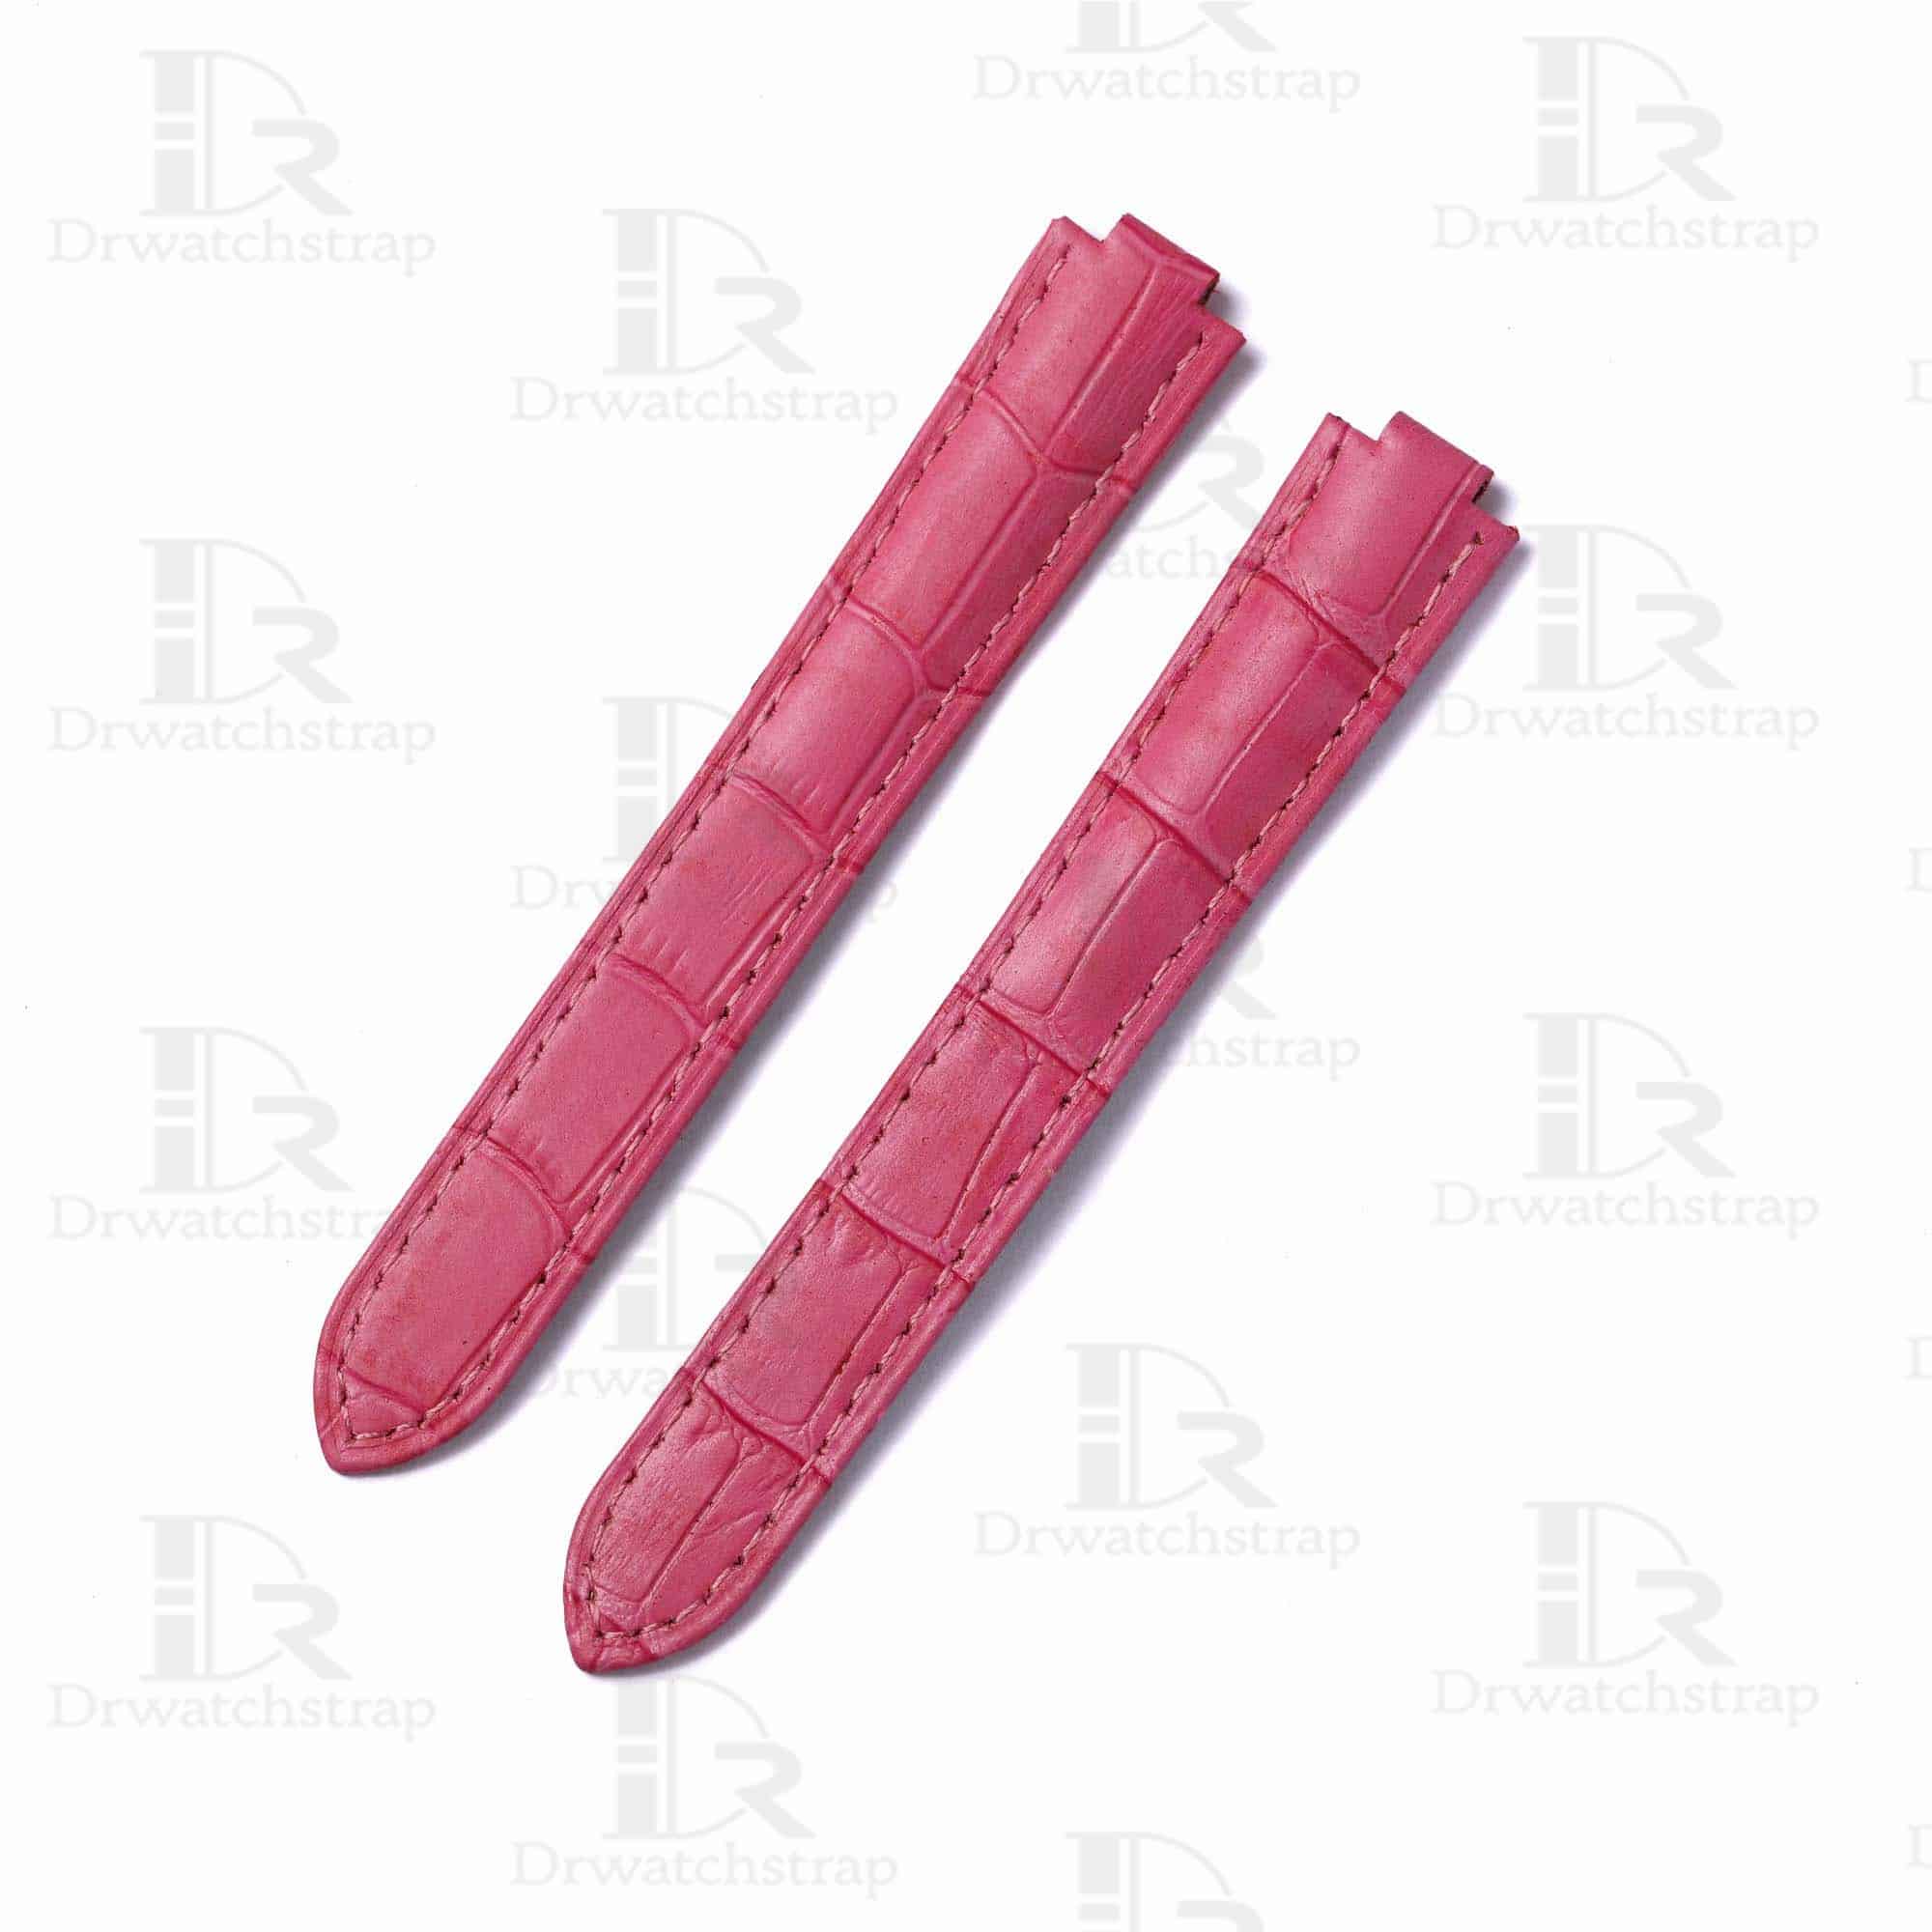 Buy custom Cartier Ballon Bleu Pink leather watch band 14mm 16mm 18mm 20mm 22mm replacement for sale